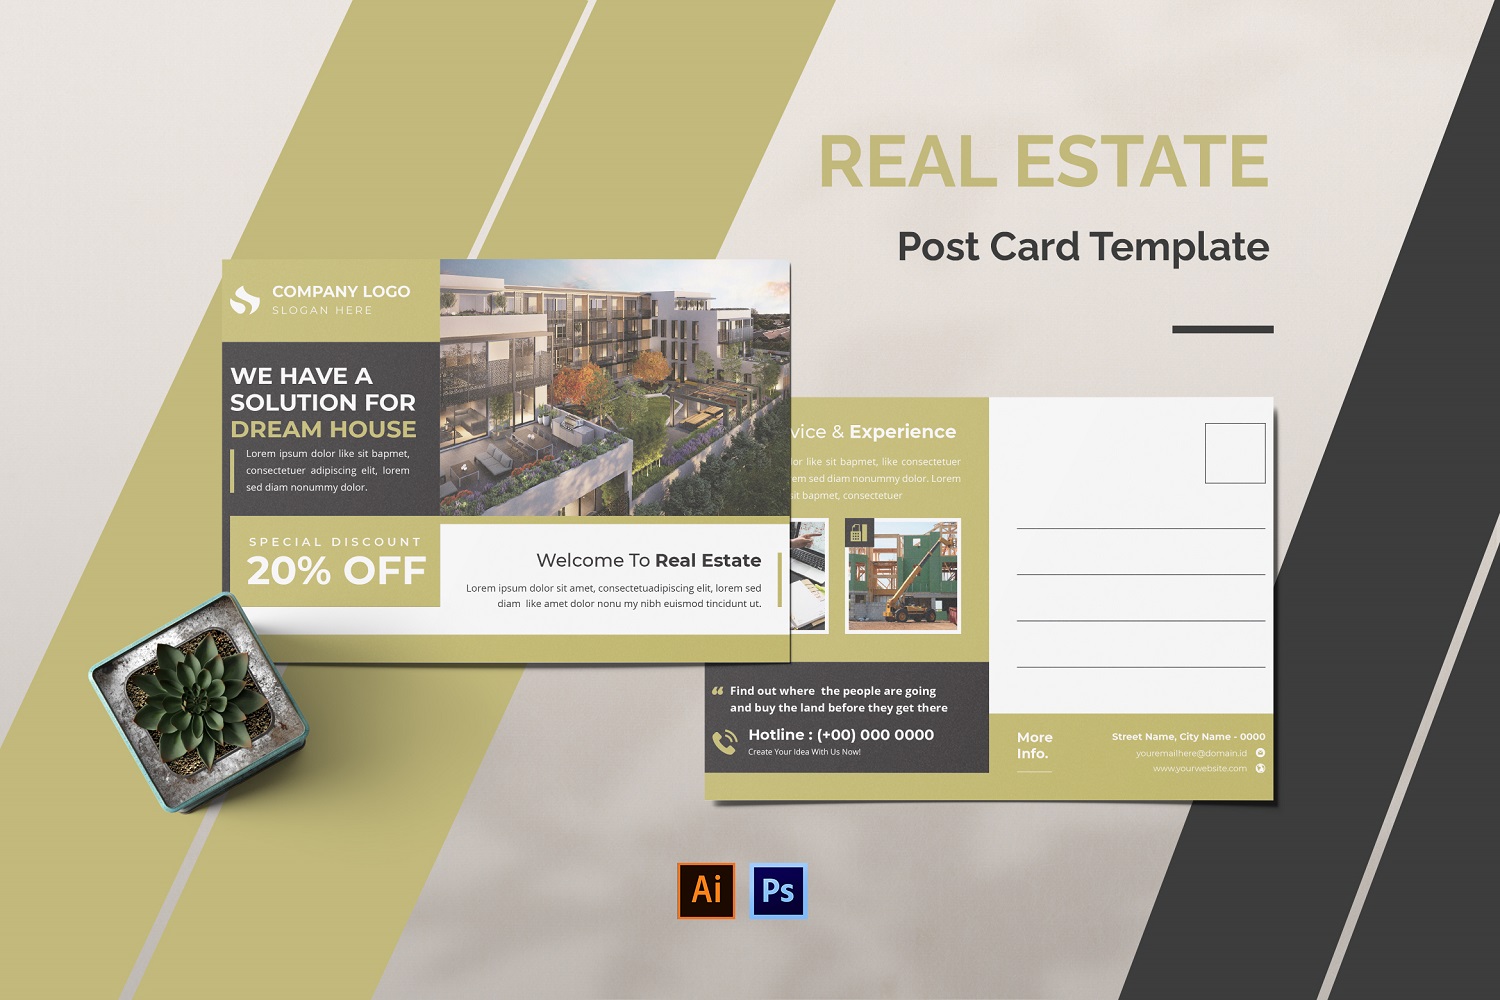 Real Estate Post Card Template